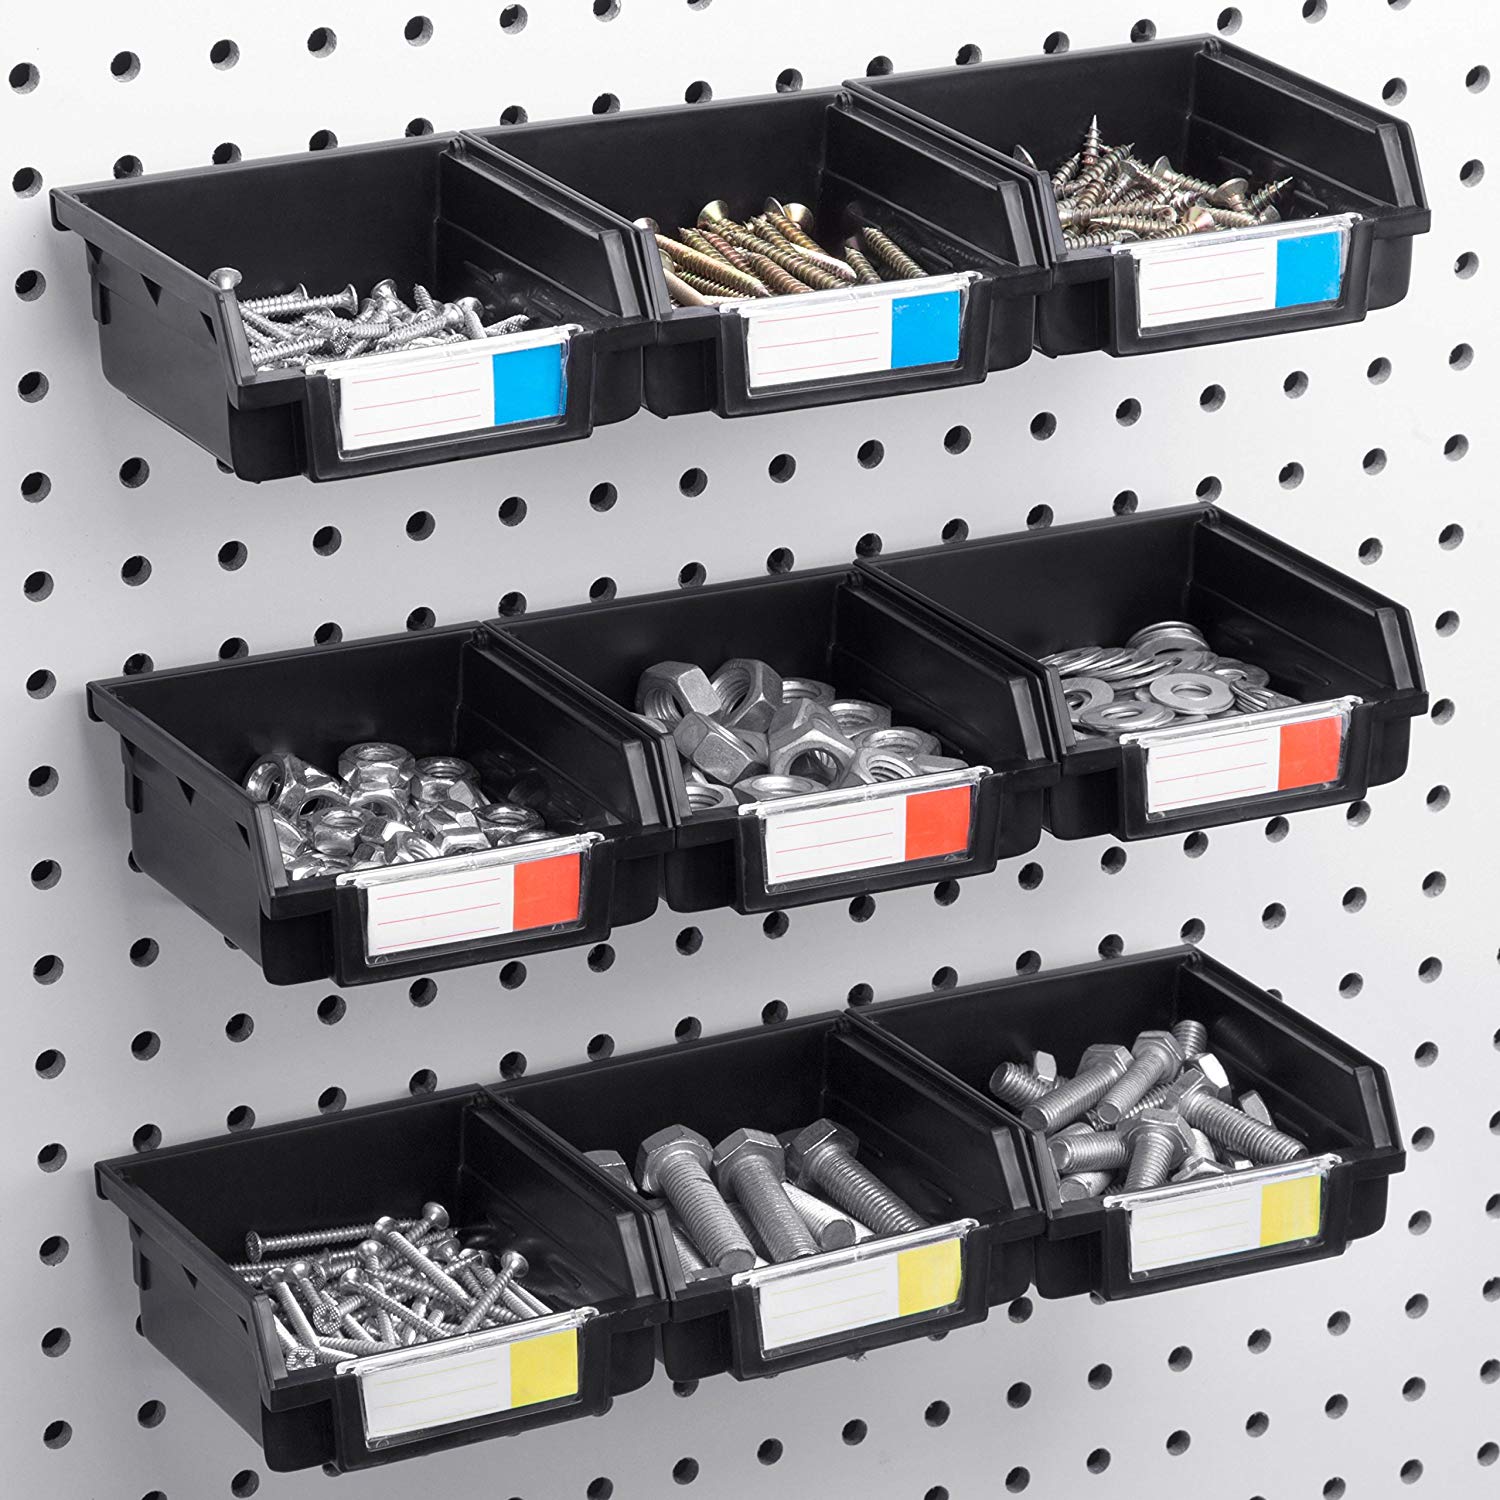 Conor Tool Pegboard Bins - 12 Pack Black - Hooks to Any Peg Board 